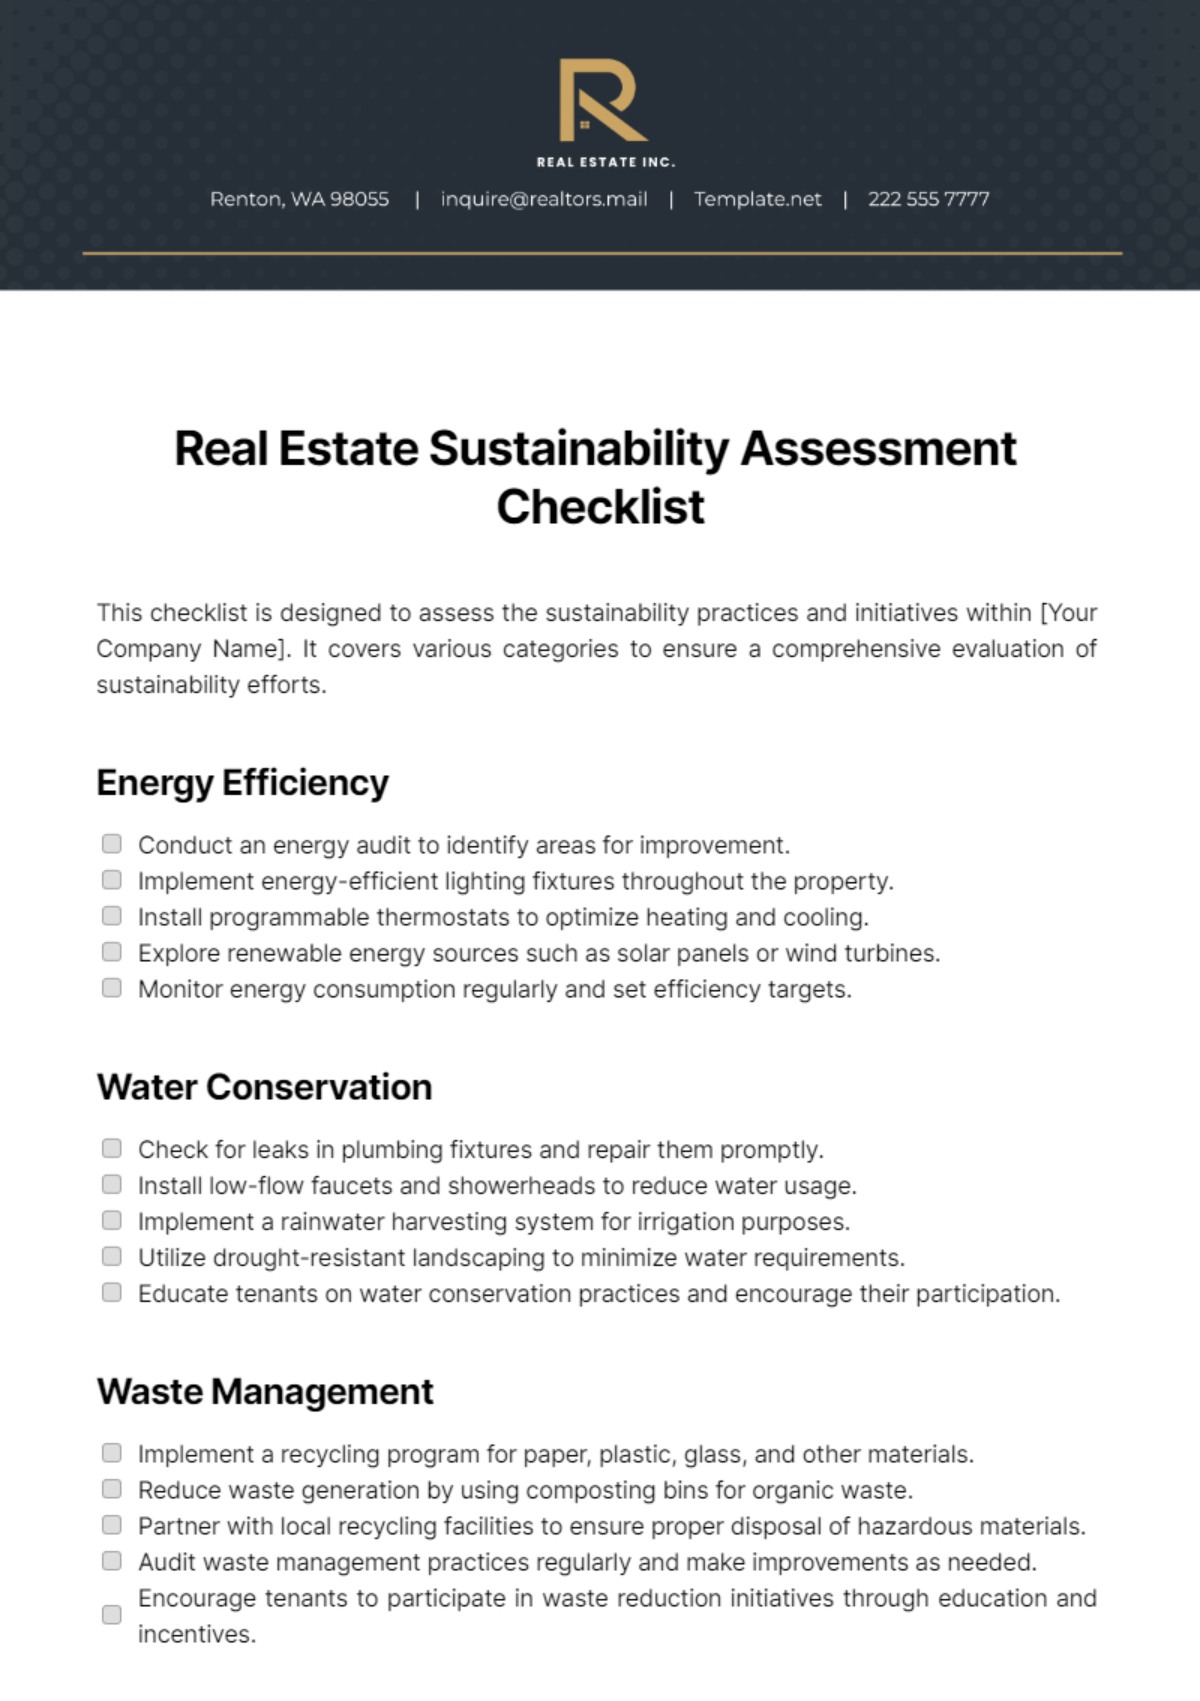 Real Estate Sustainability Assessment Checklist Template